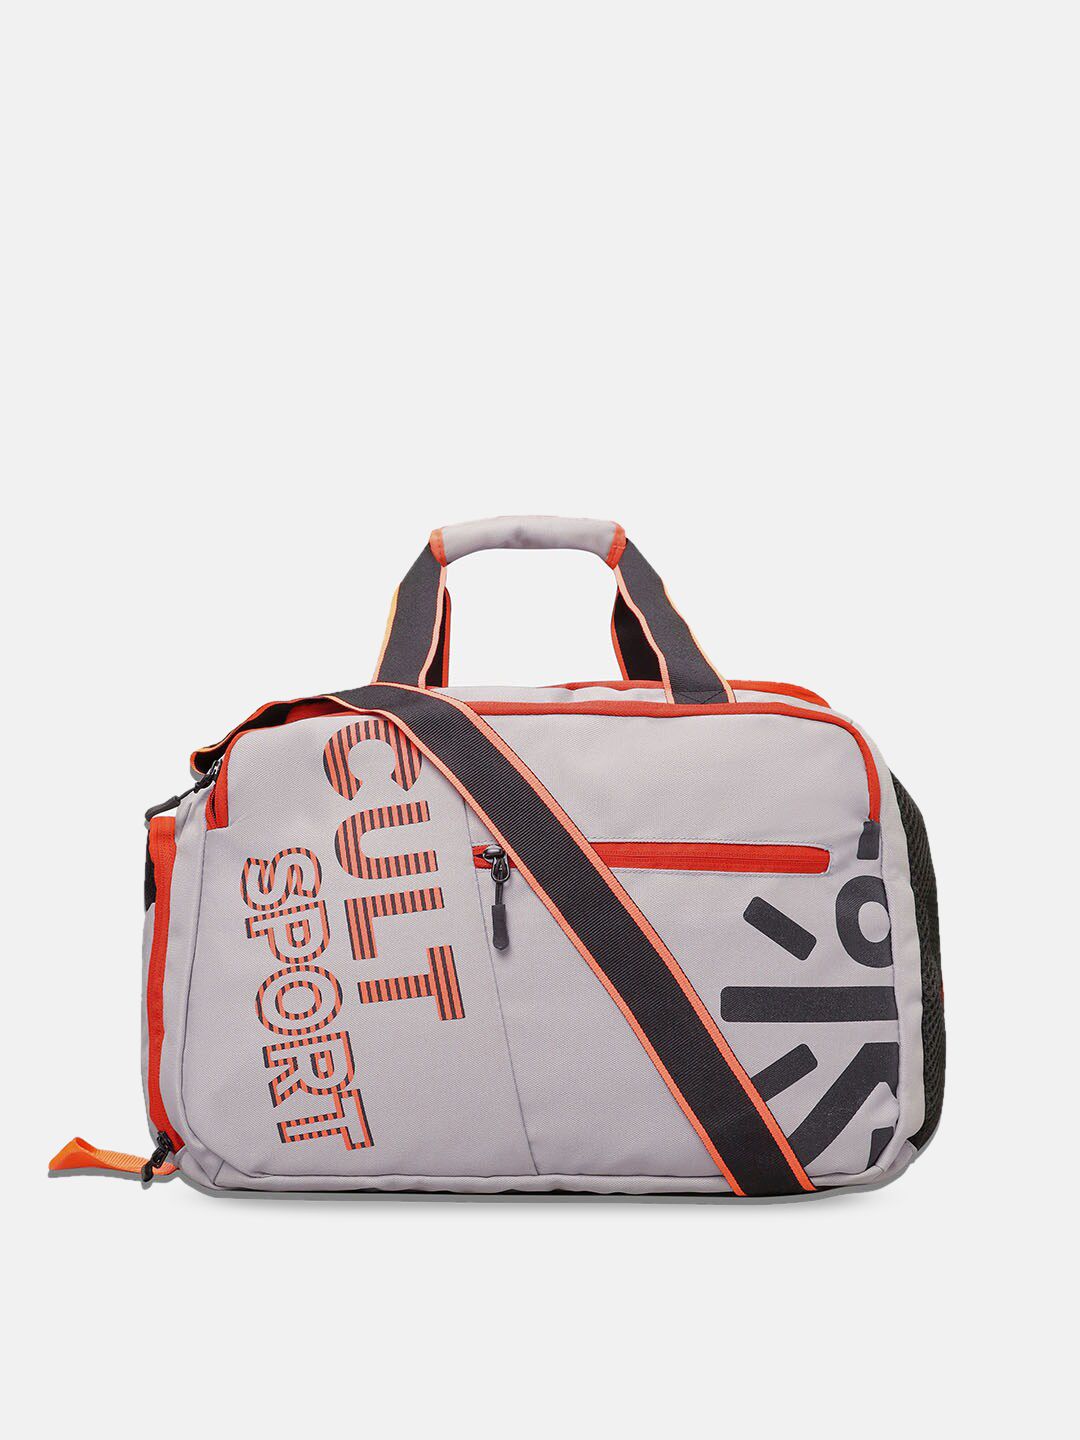 Cultsport Grey & Black Printed Duffel Bag With Shoe Compartment Price in India